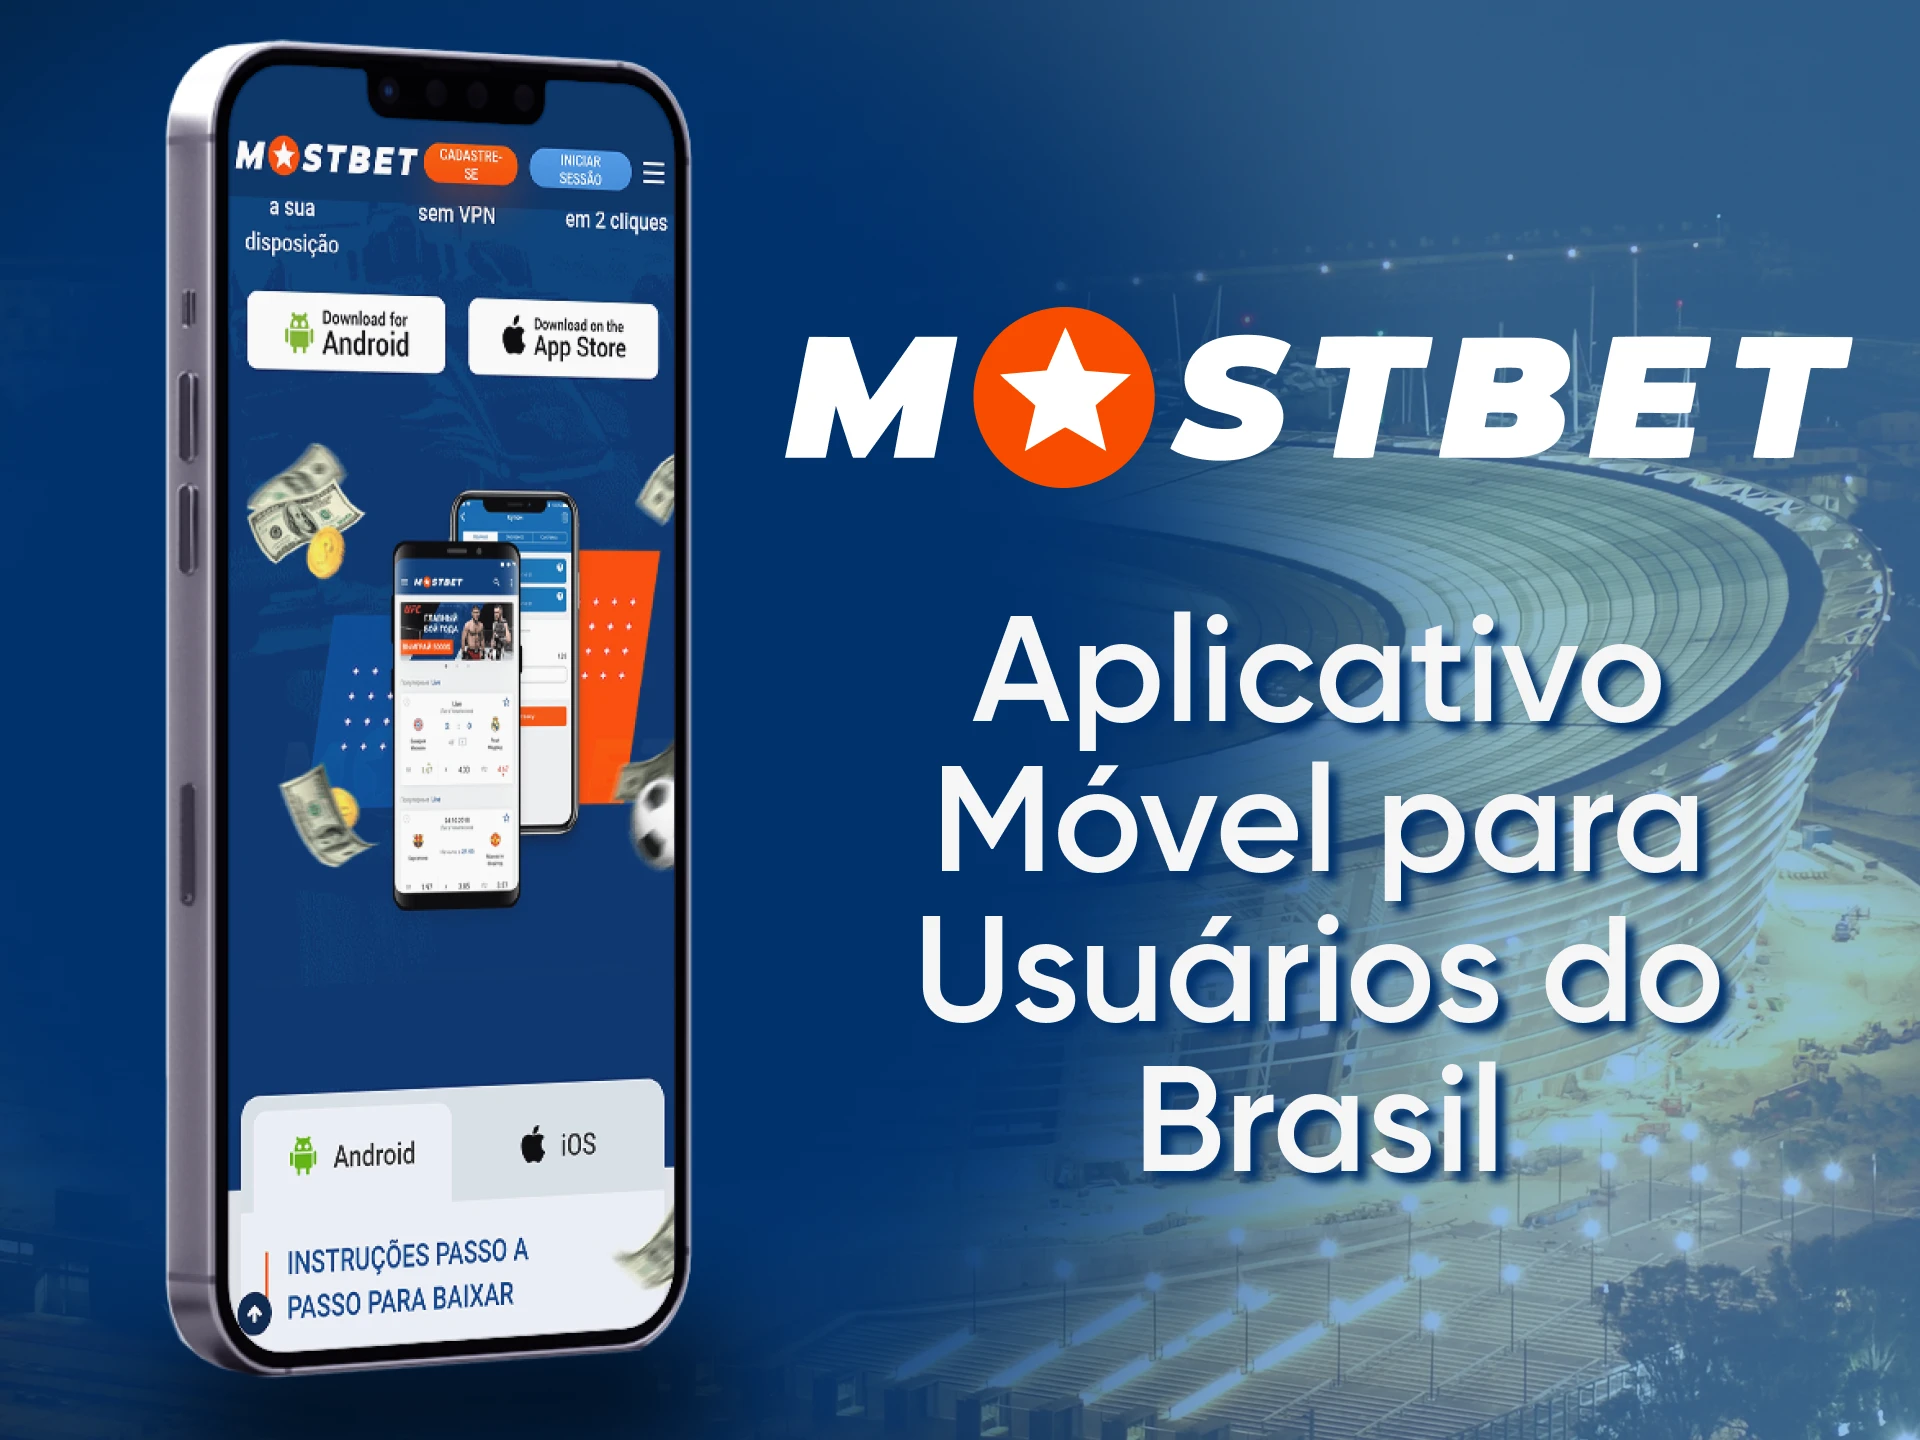 The Mostbet app supports sports betting in Brazil.